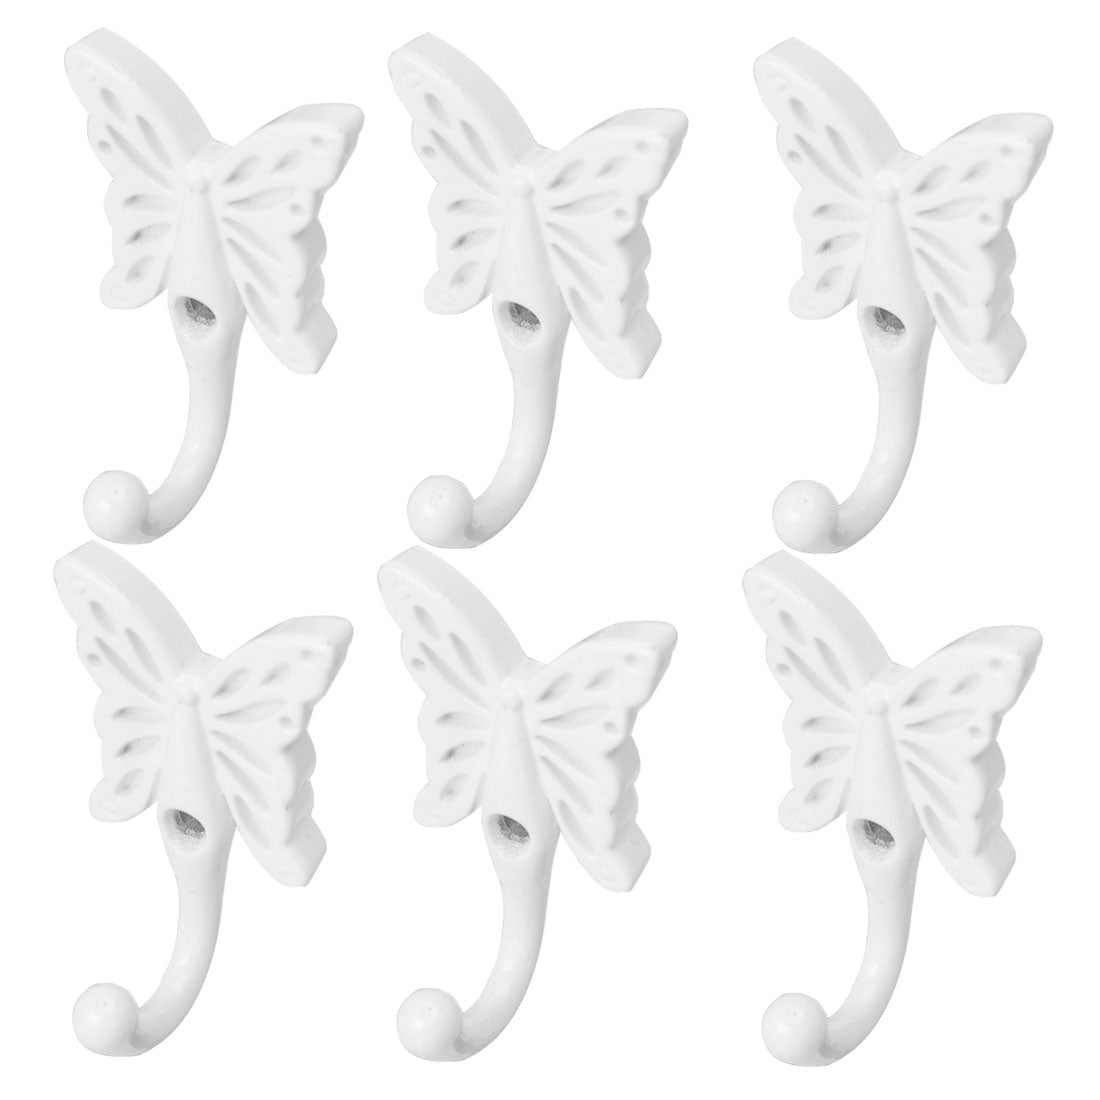 uxcell Uxcell 6pcs Robe Hooks Wall Mounted Zinc Alloy Coat Scarf DIY Hanger with Screws White